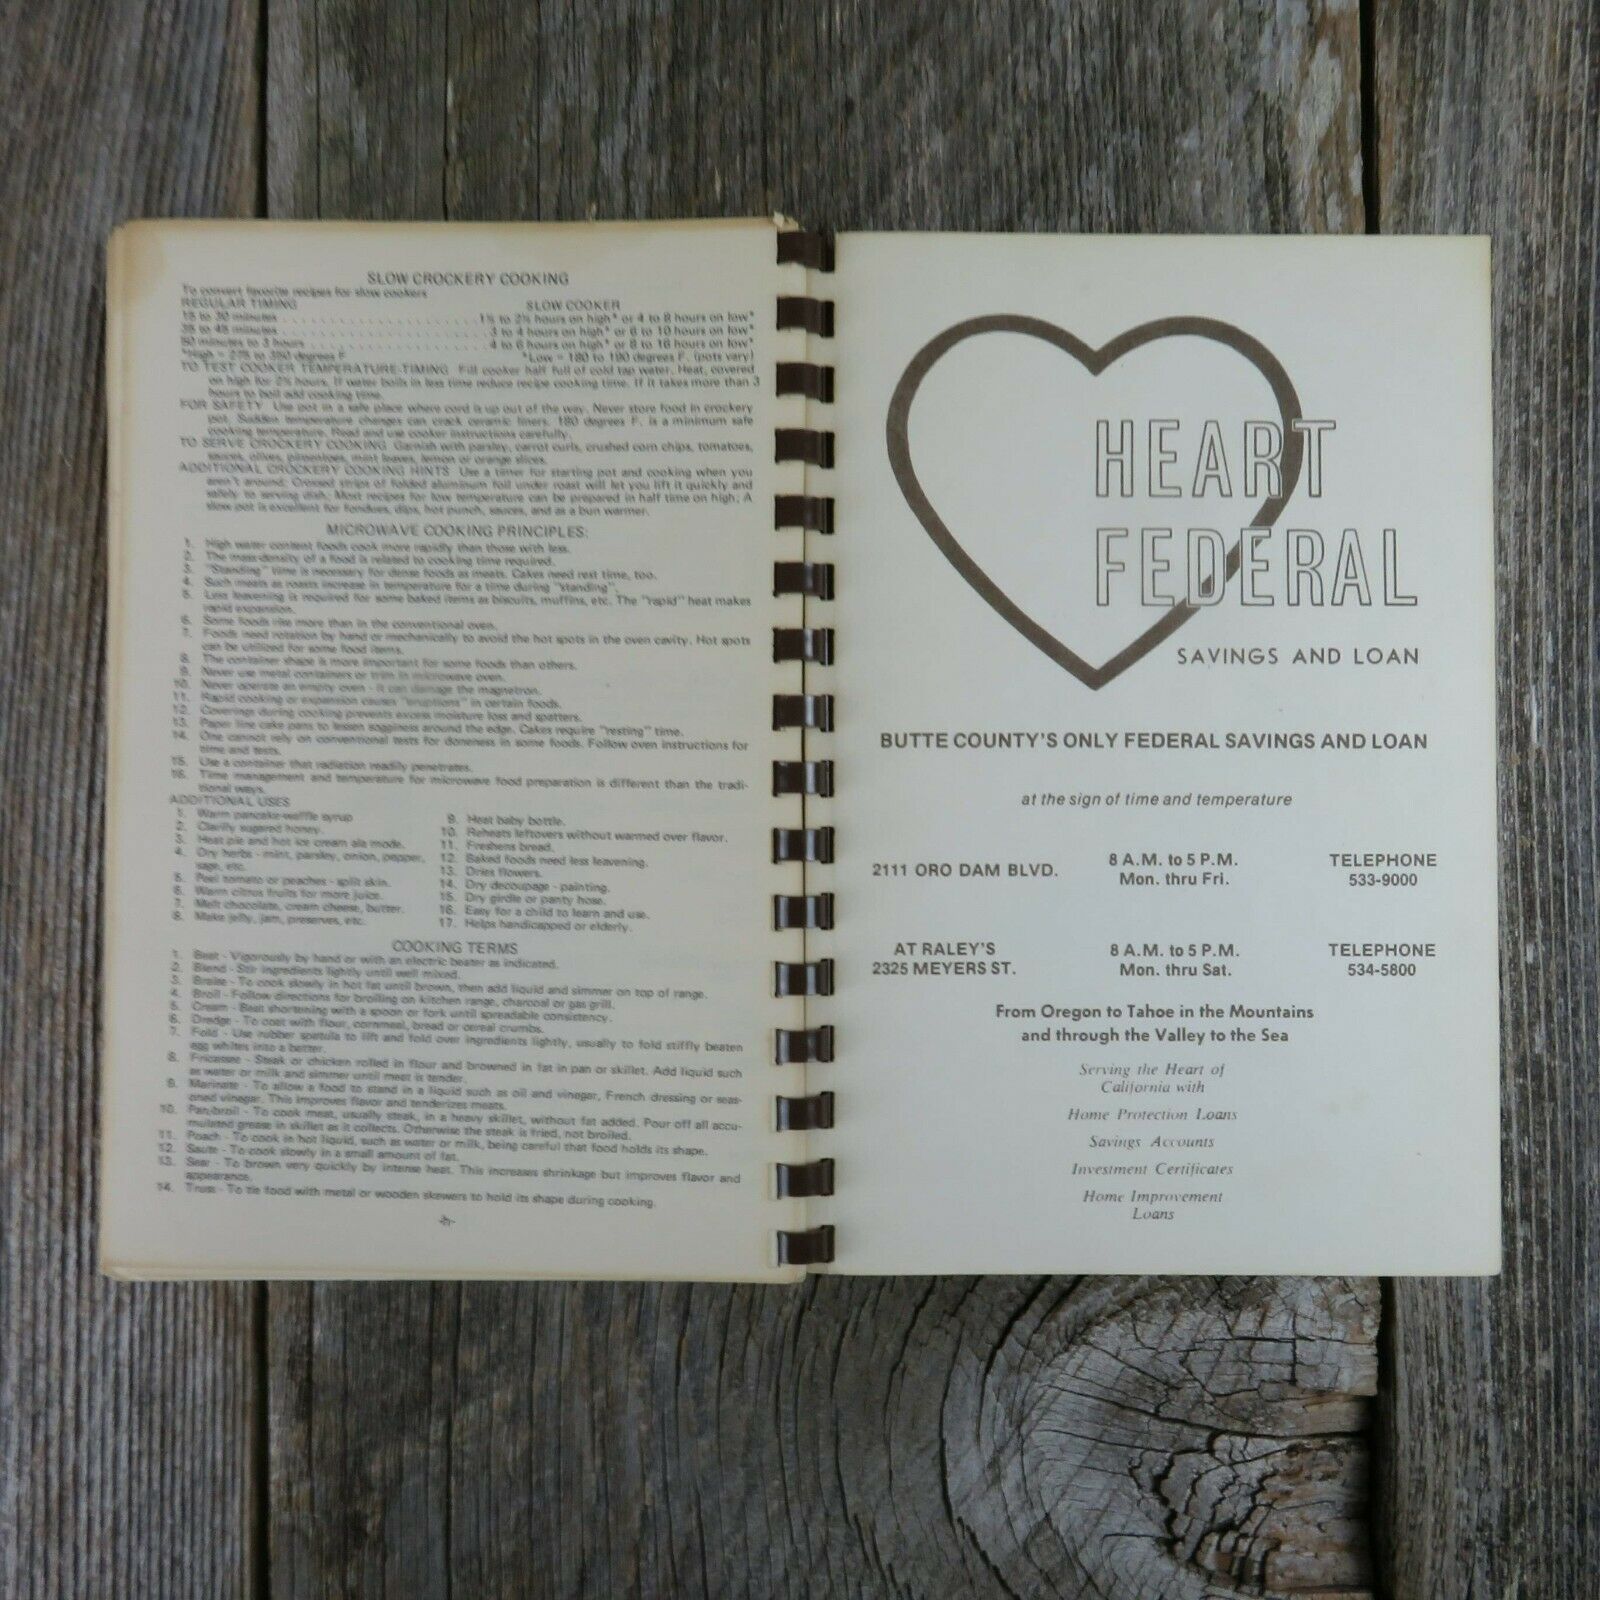 Vintage California Cookbook Gridley Recipes of Butte County Cow Belles 1980s - At Grandma's Table